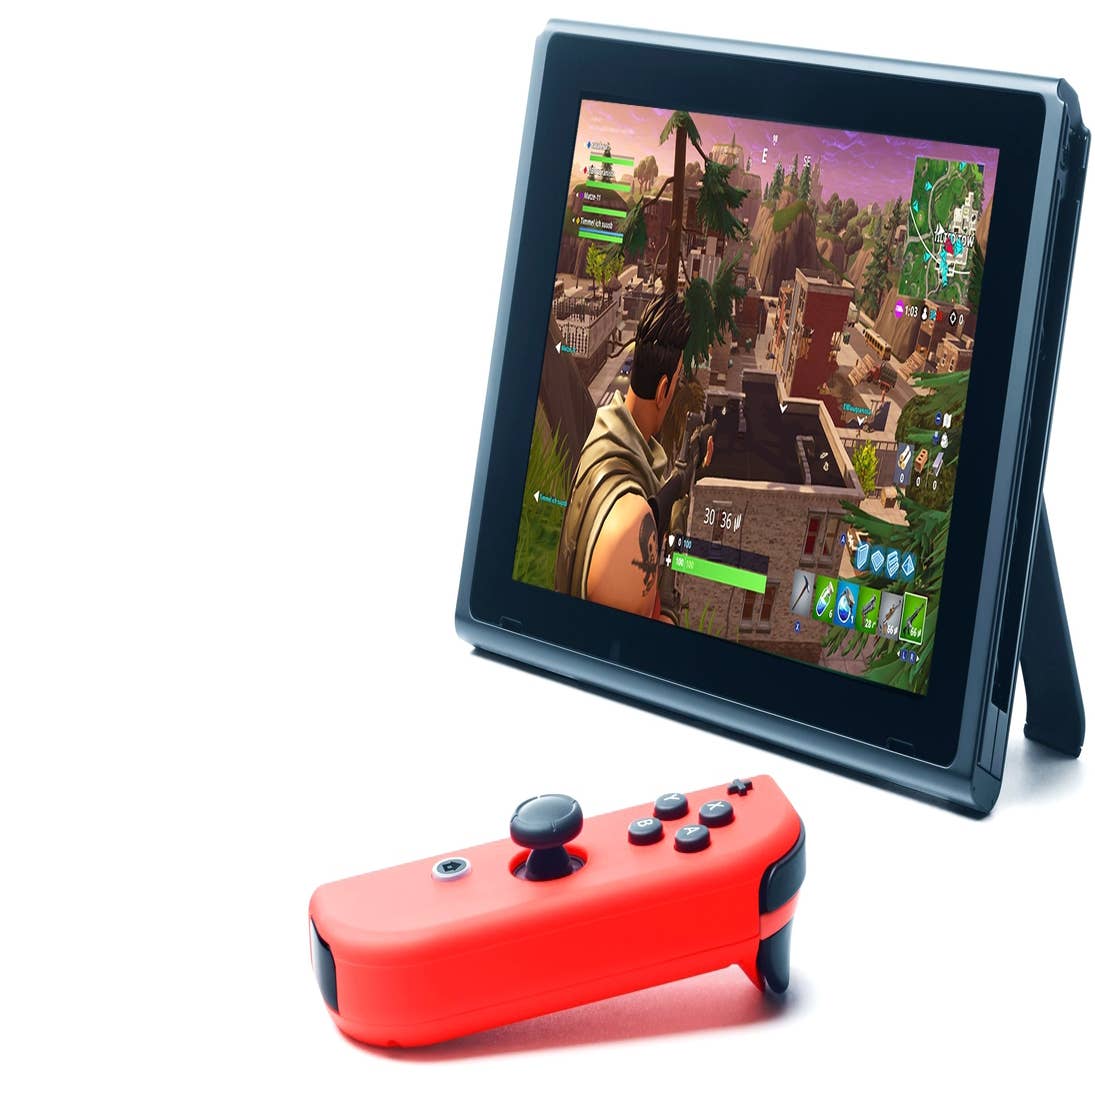 Fortnite' receives visual and performance update on Nintendo Switch